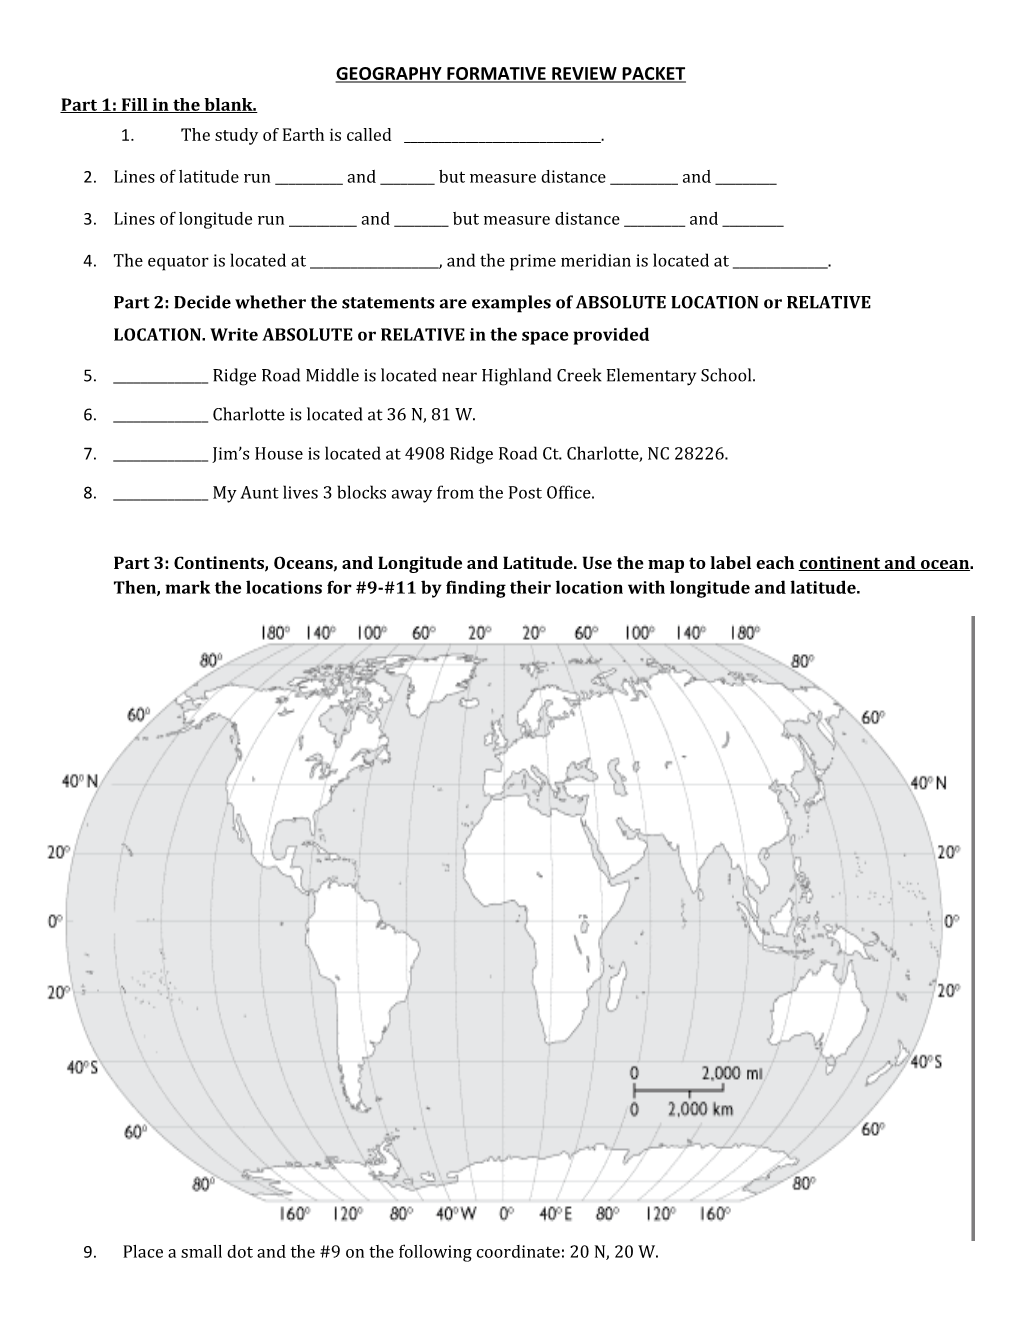 Geography Formative Review Packet